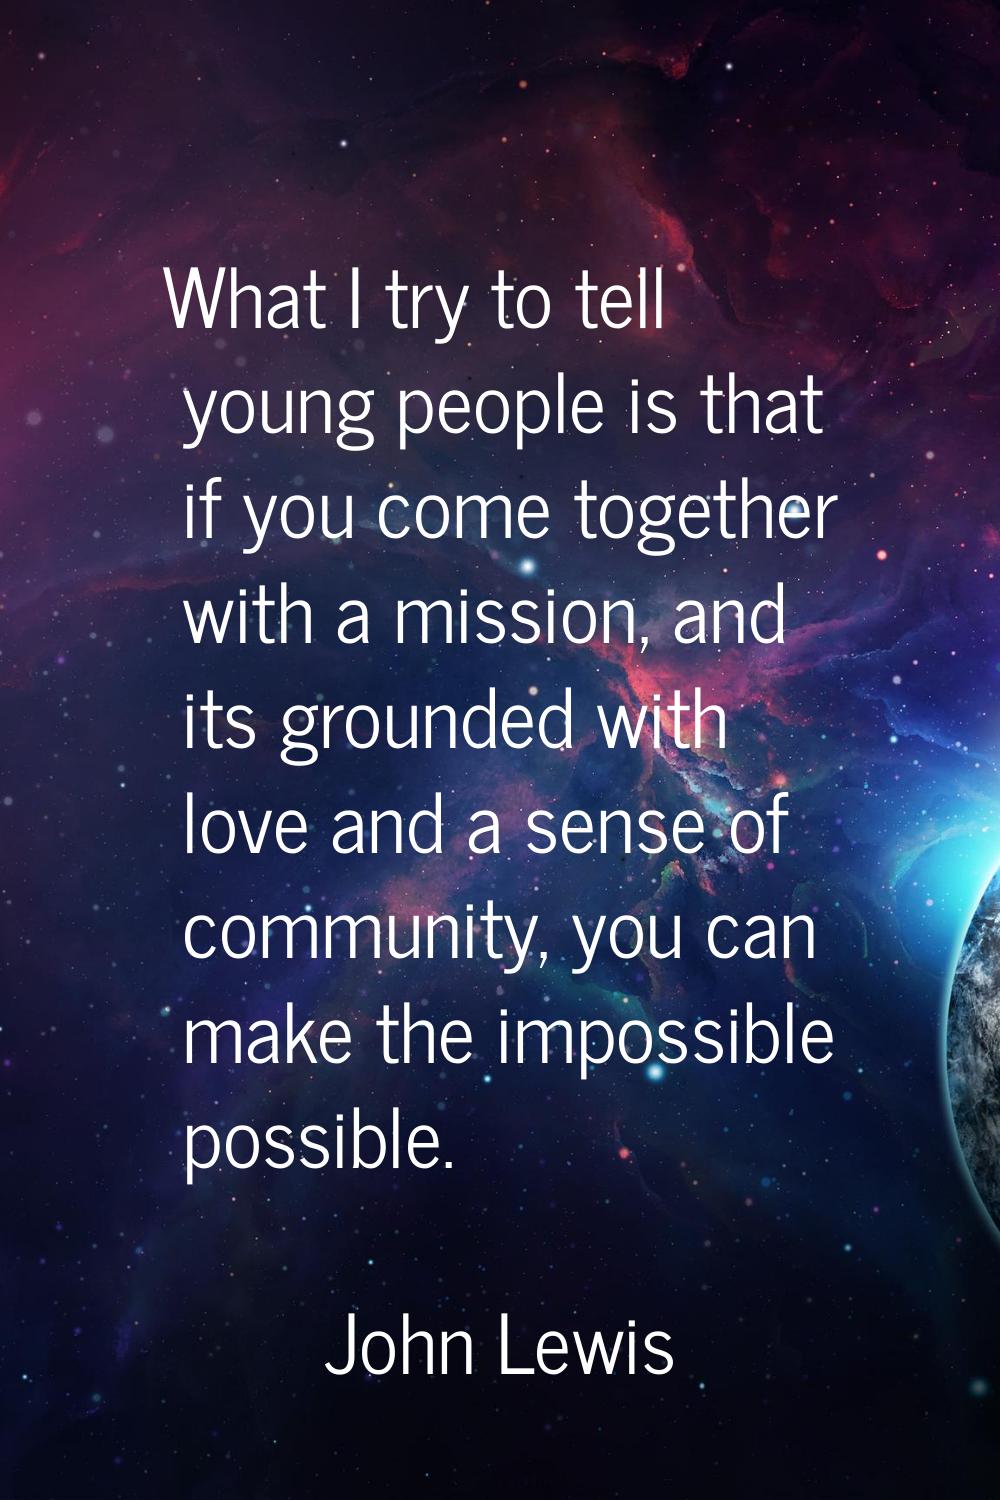 What I try to tell young people is that if you come together with a mission, and its grounded with 